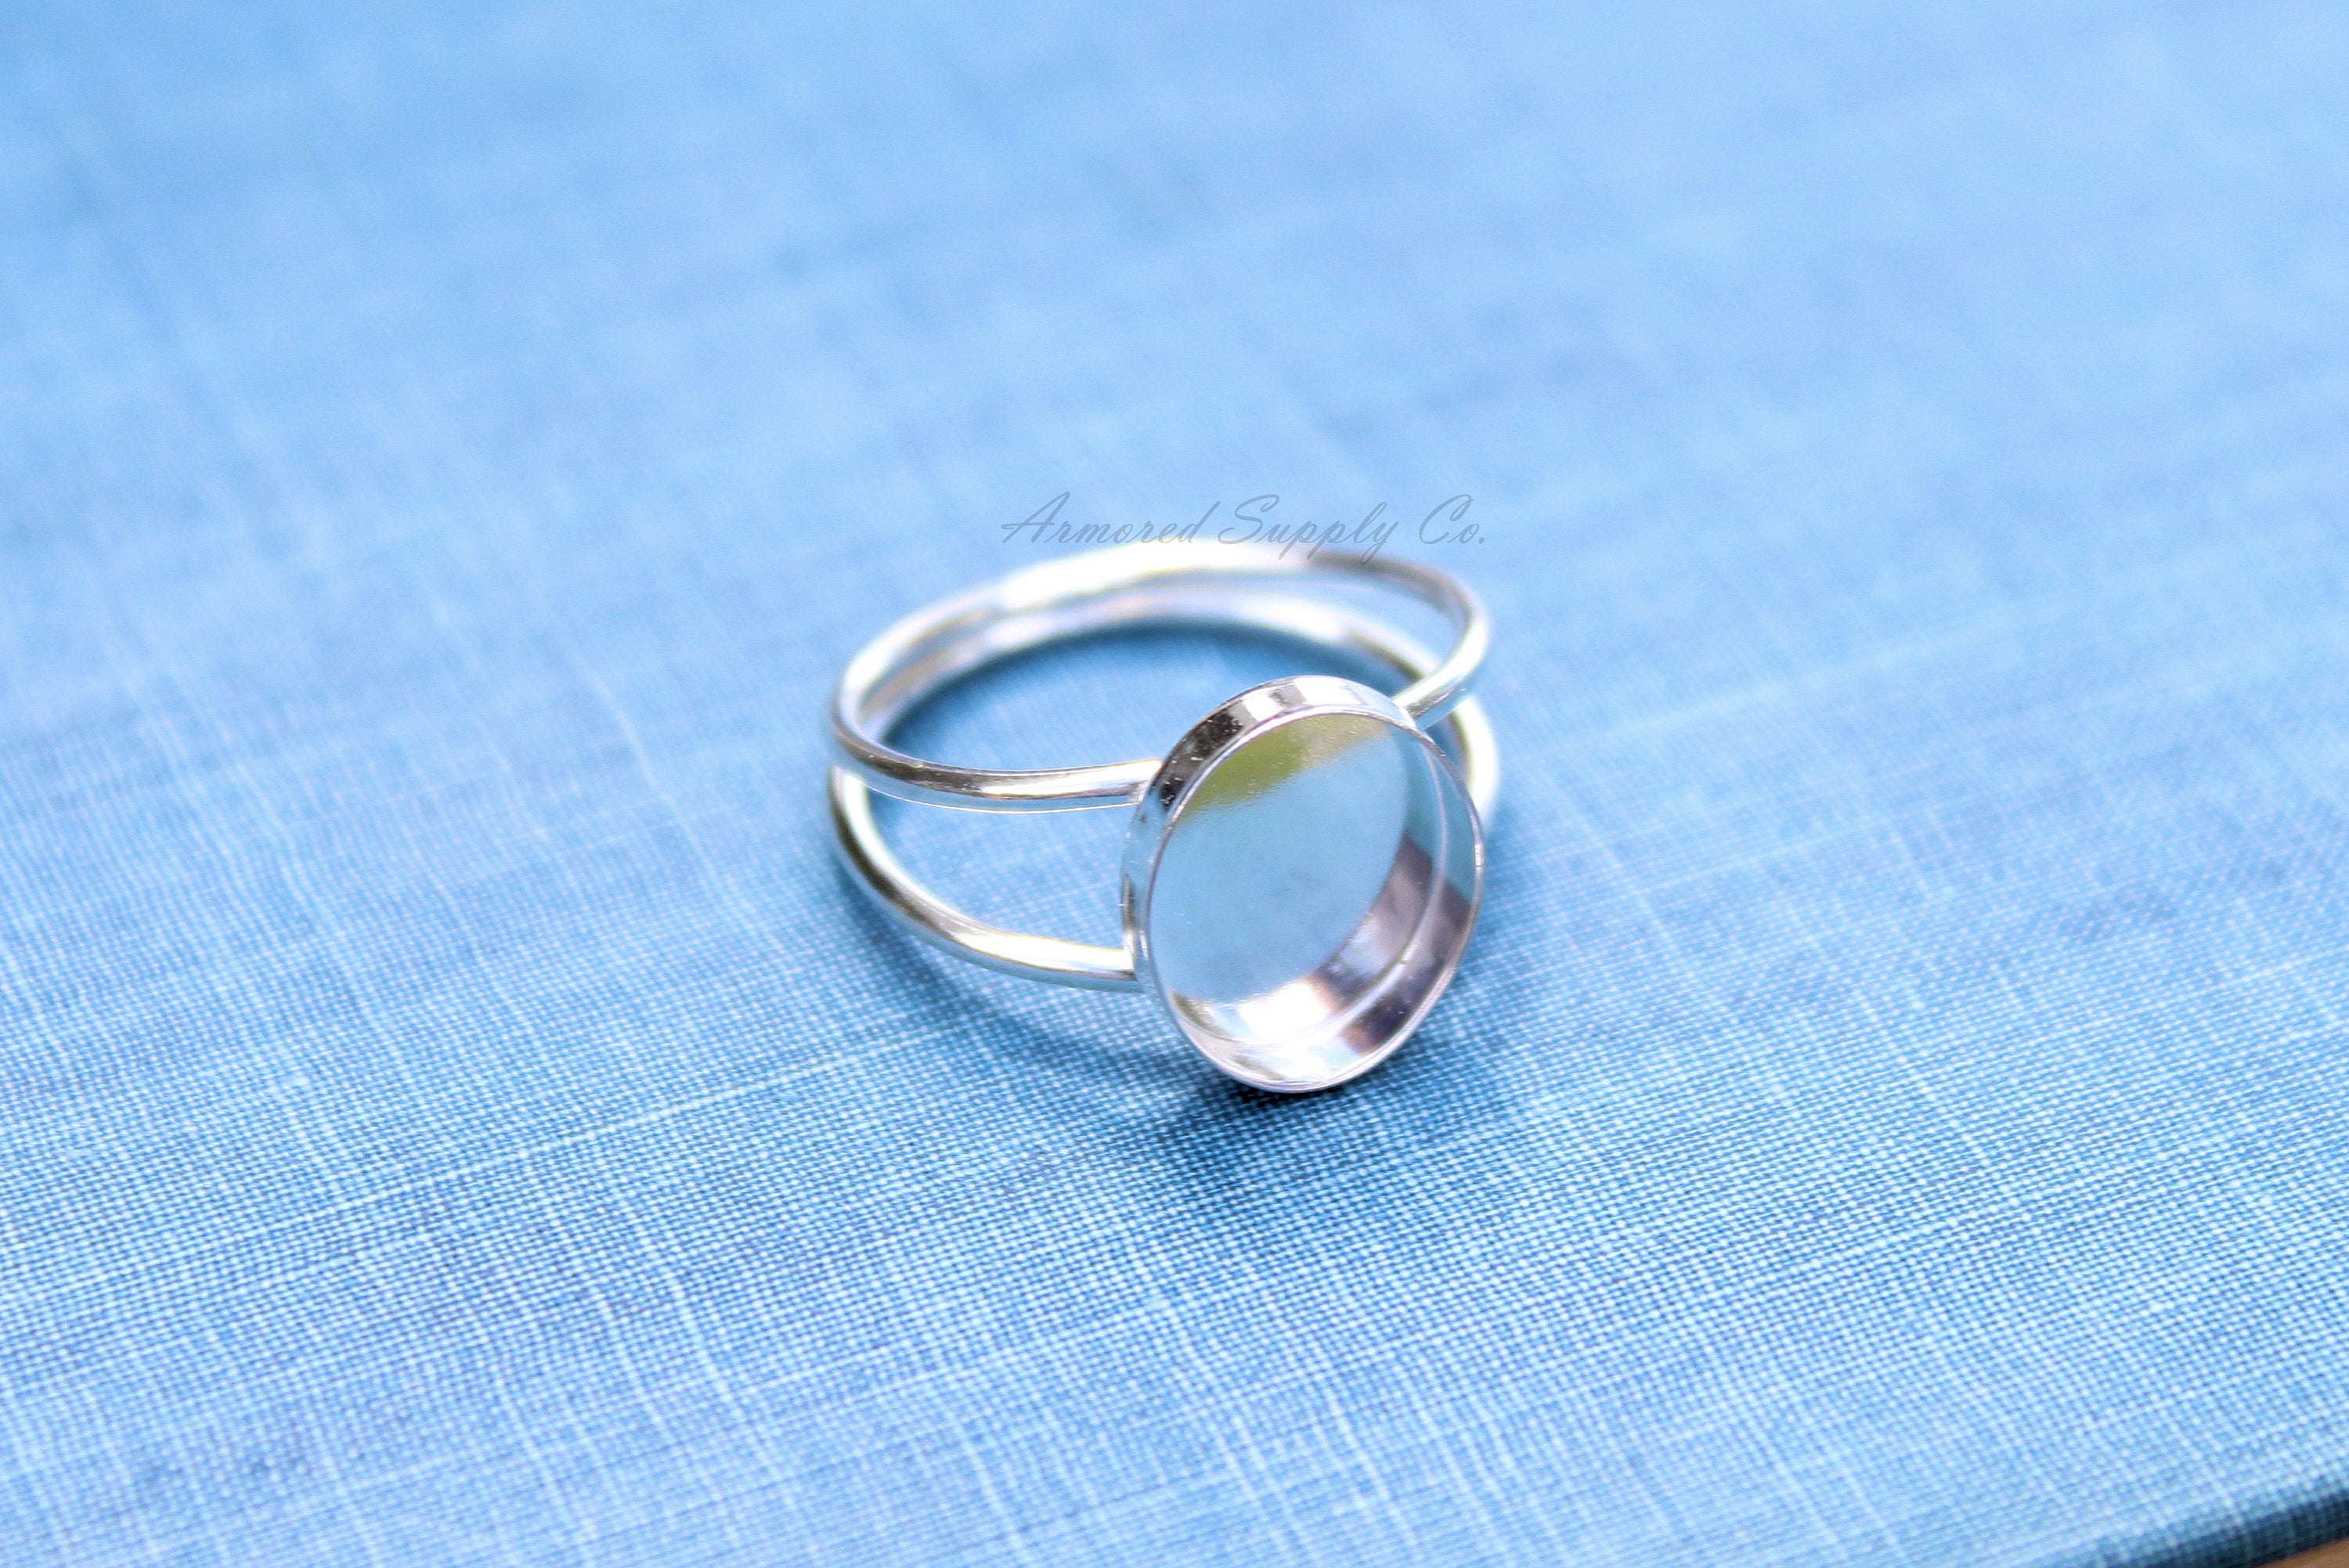 Sterling Silver Double Band Oval Bezel Cup Ring blank, Round Cabochon, Oval Ring Blank, DIY jewelry supplies, wholesale jewelry, diy ring